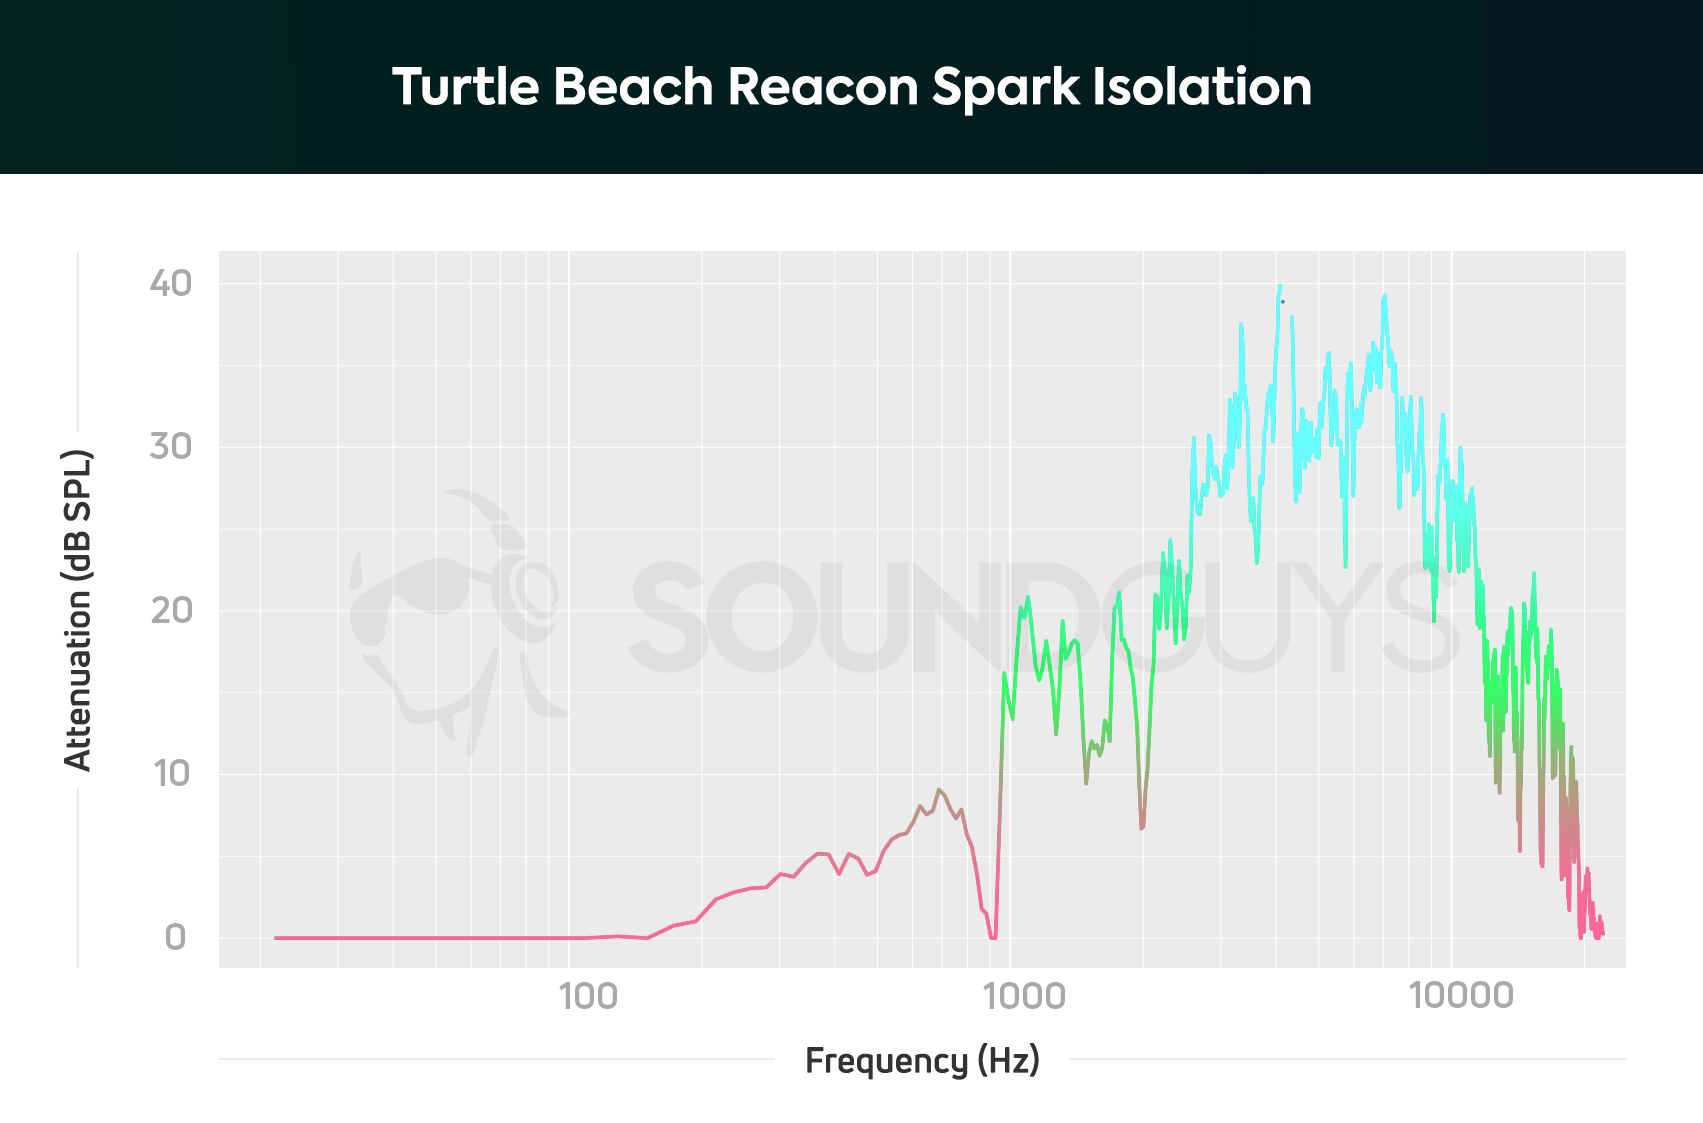 An isolation chart for the Turtle Beach Recon Spark gaming headset, which shows pretty average isolation